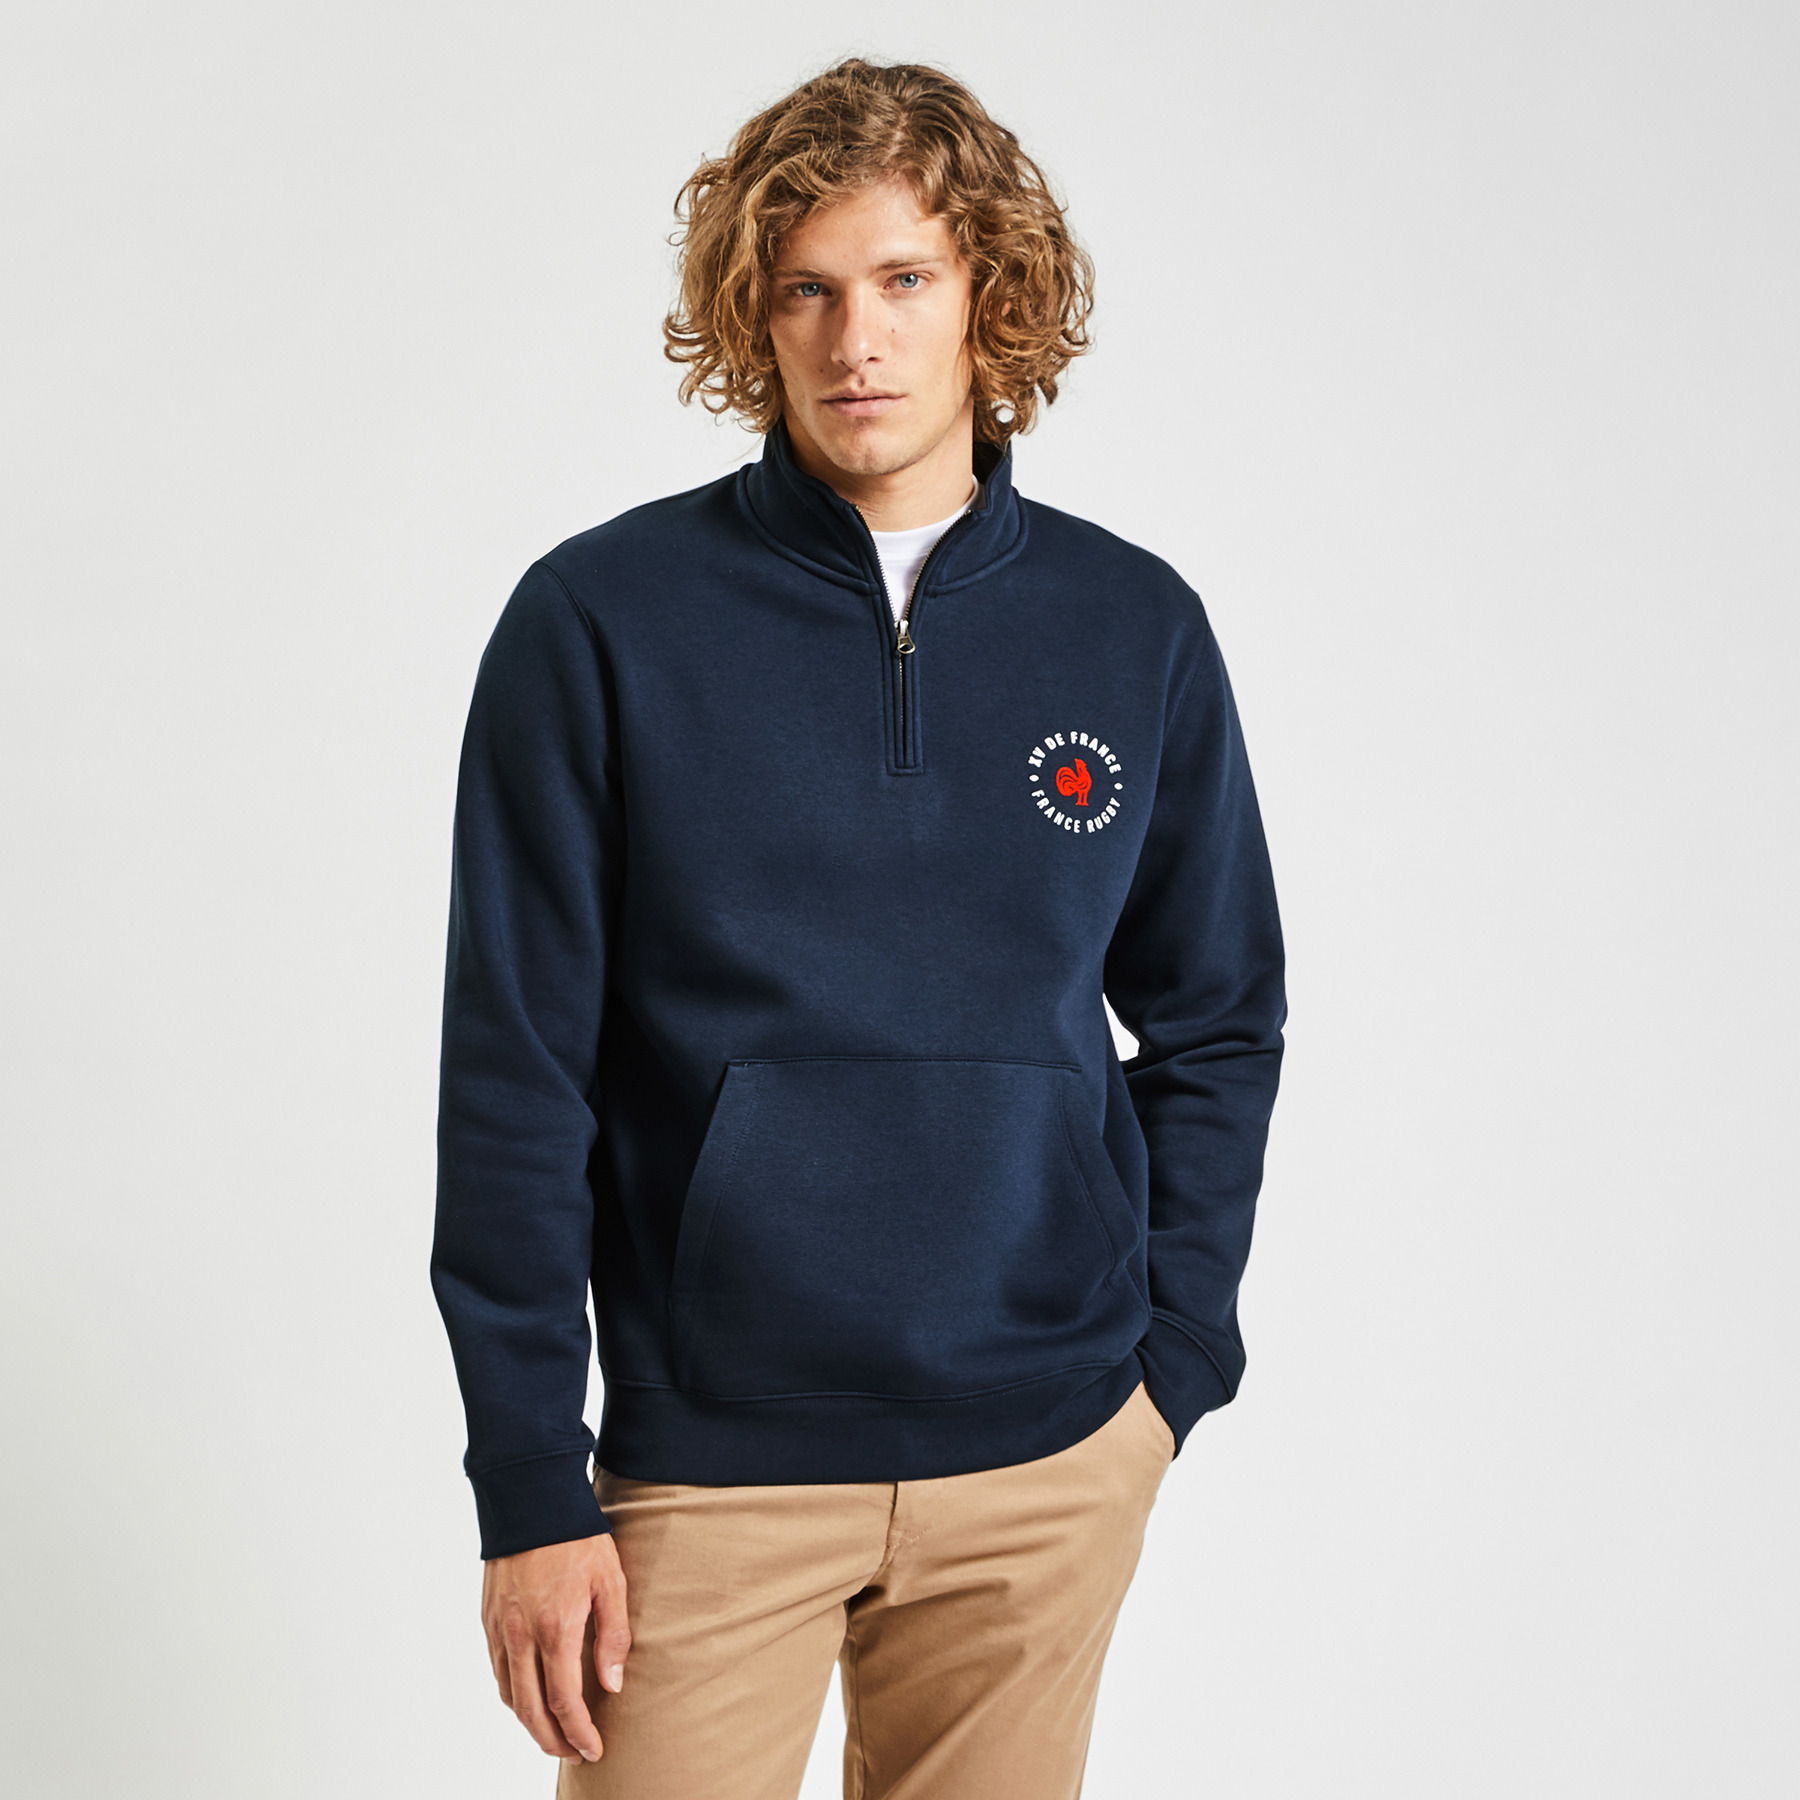 Sweat zip licence France rugby Bleu S 70% Coton, 30% Polyester Homme